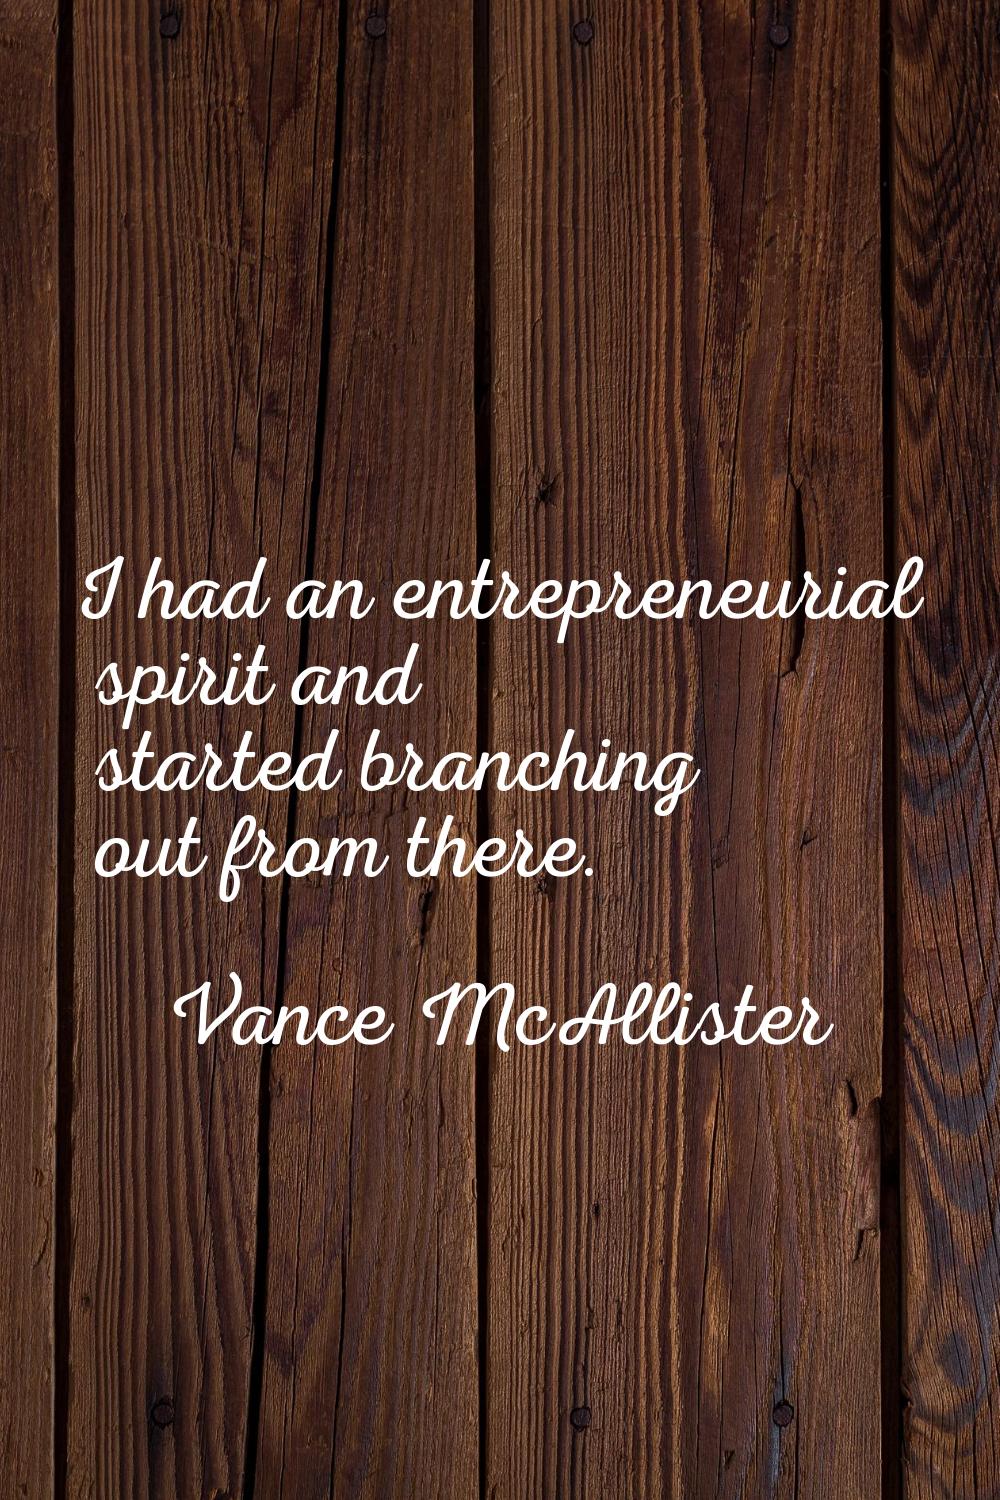 I had an entrepreneurial spirit and started branching out from there.